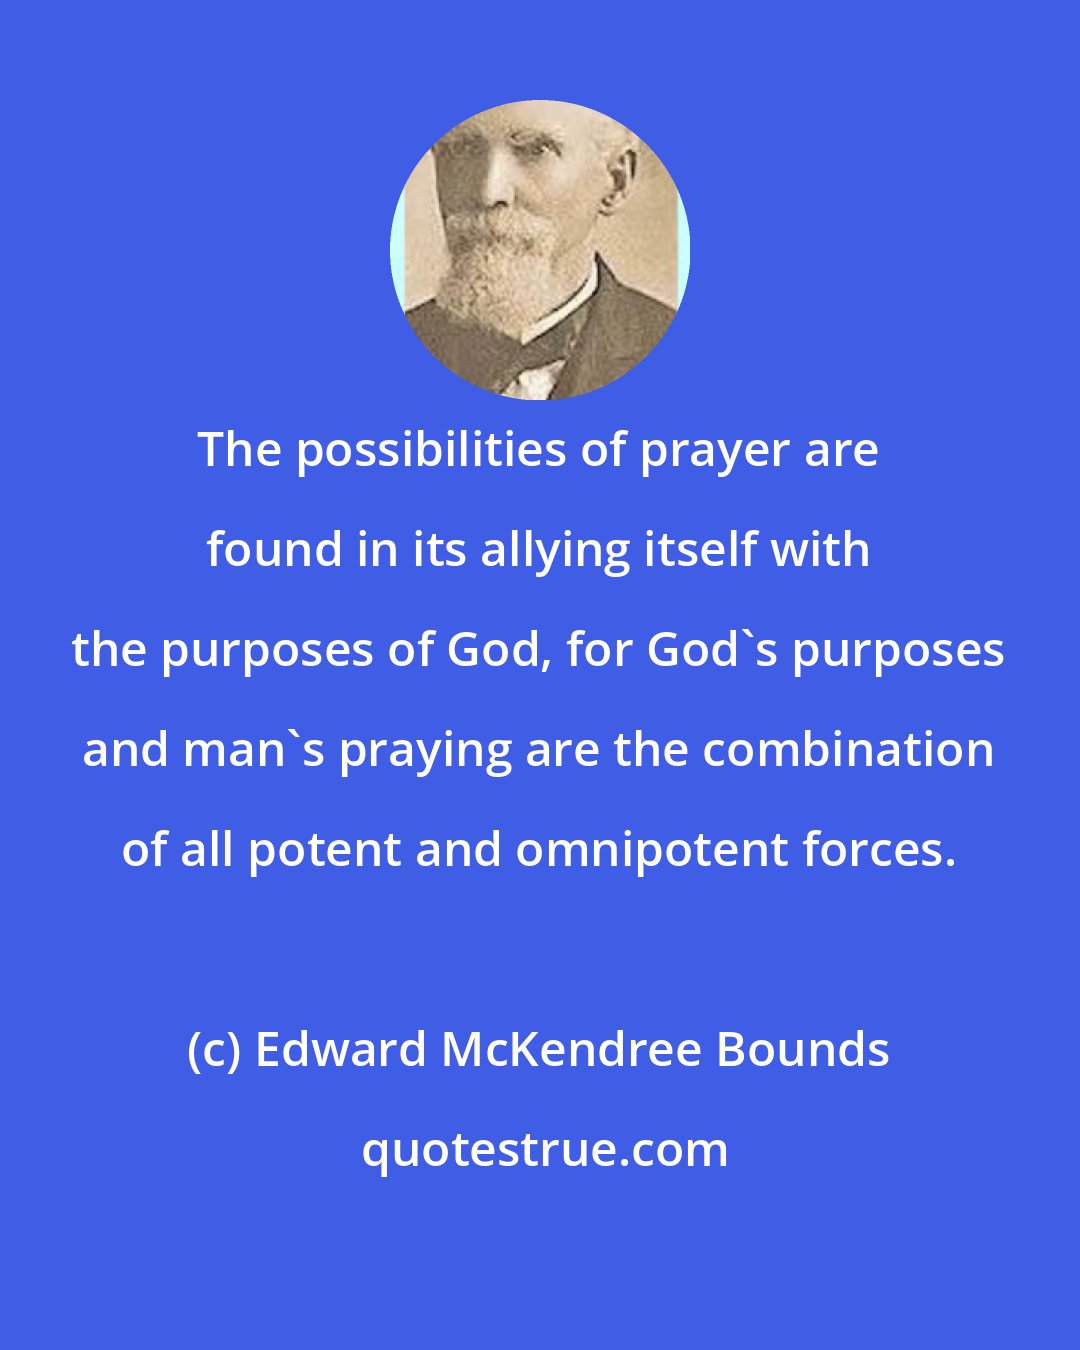 Edward McKendree Bounds: The possibilities of prayer are found in its allying itself with the purposes of God, for God's purposes and man's praying are the combination of all potent and omnipotent forces.